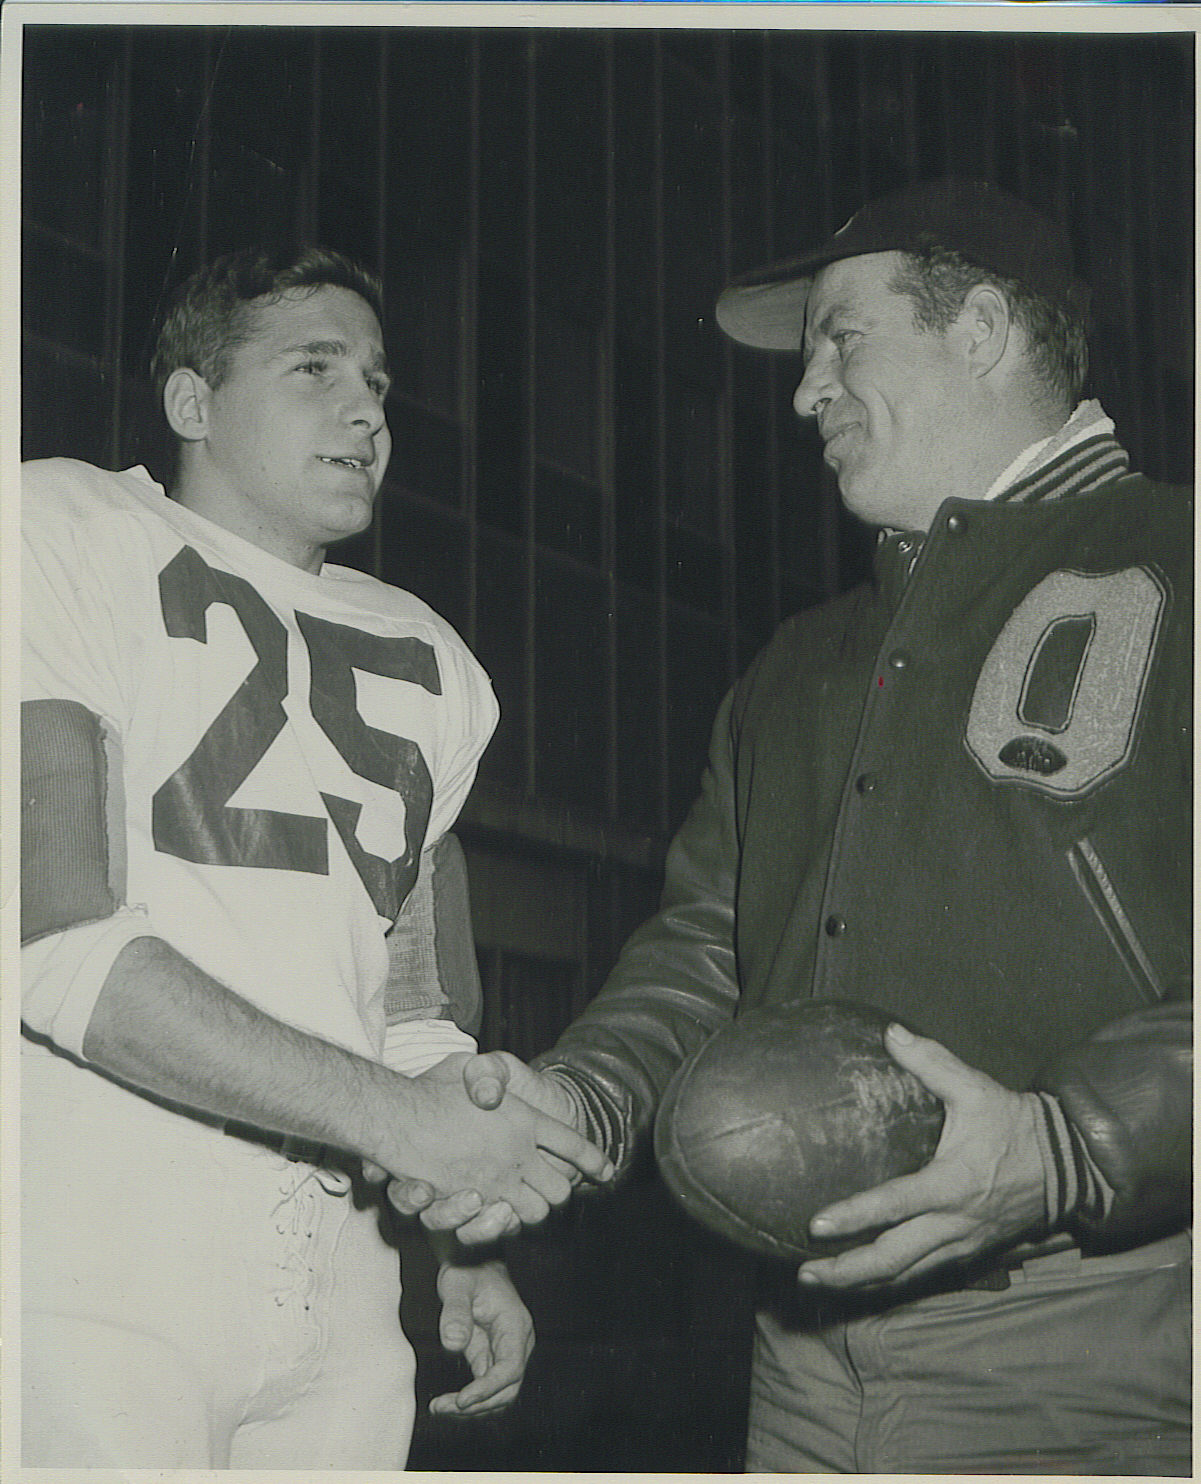 Player number 25 shakes hands with coach who is holding football.